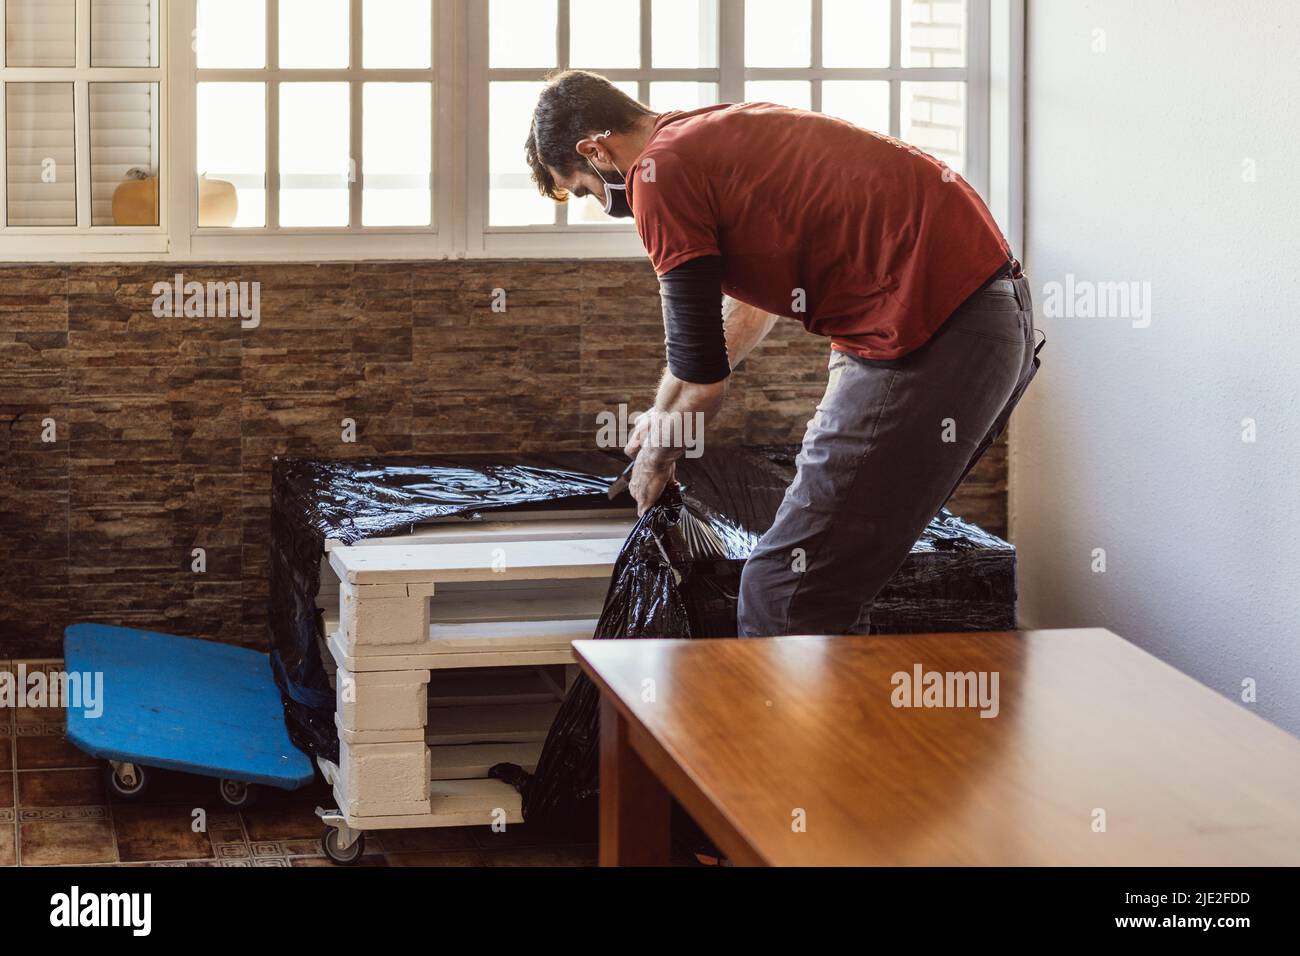 worker removing plastic wrap from a piece of furniture in a moving operation Stock Photo